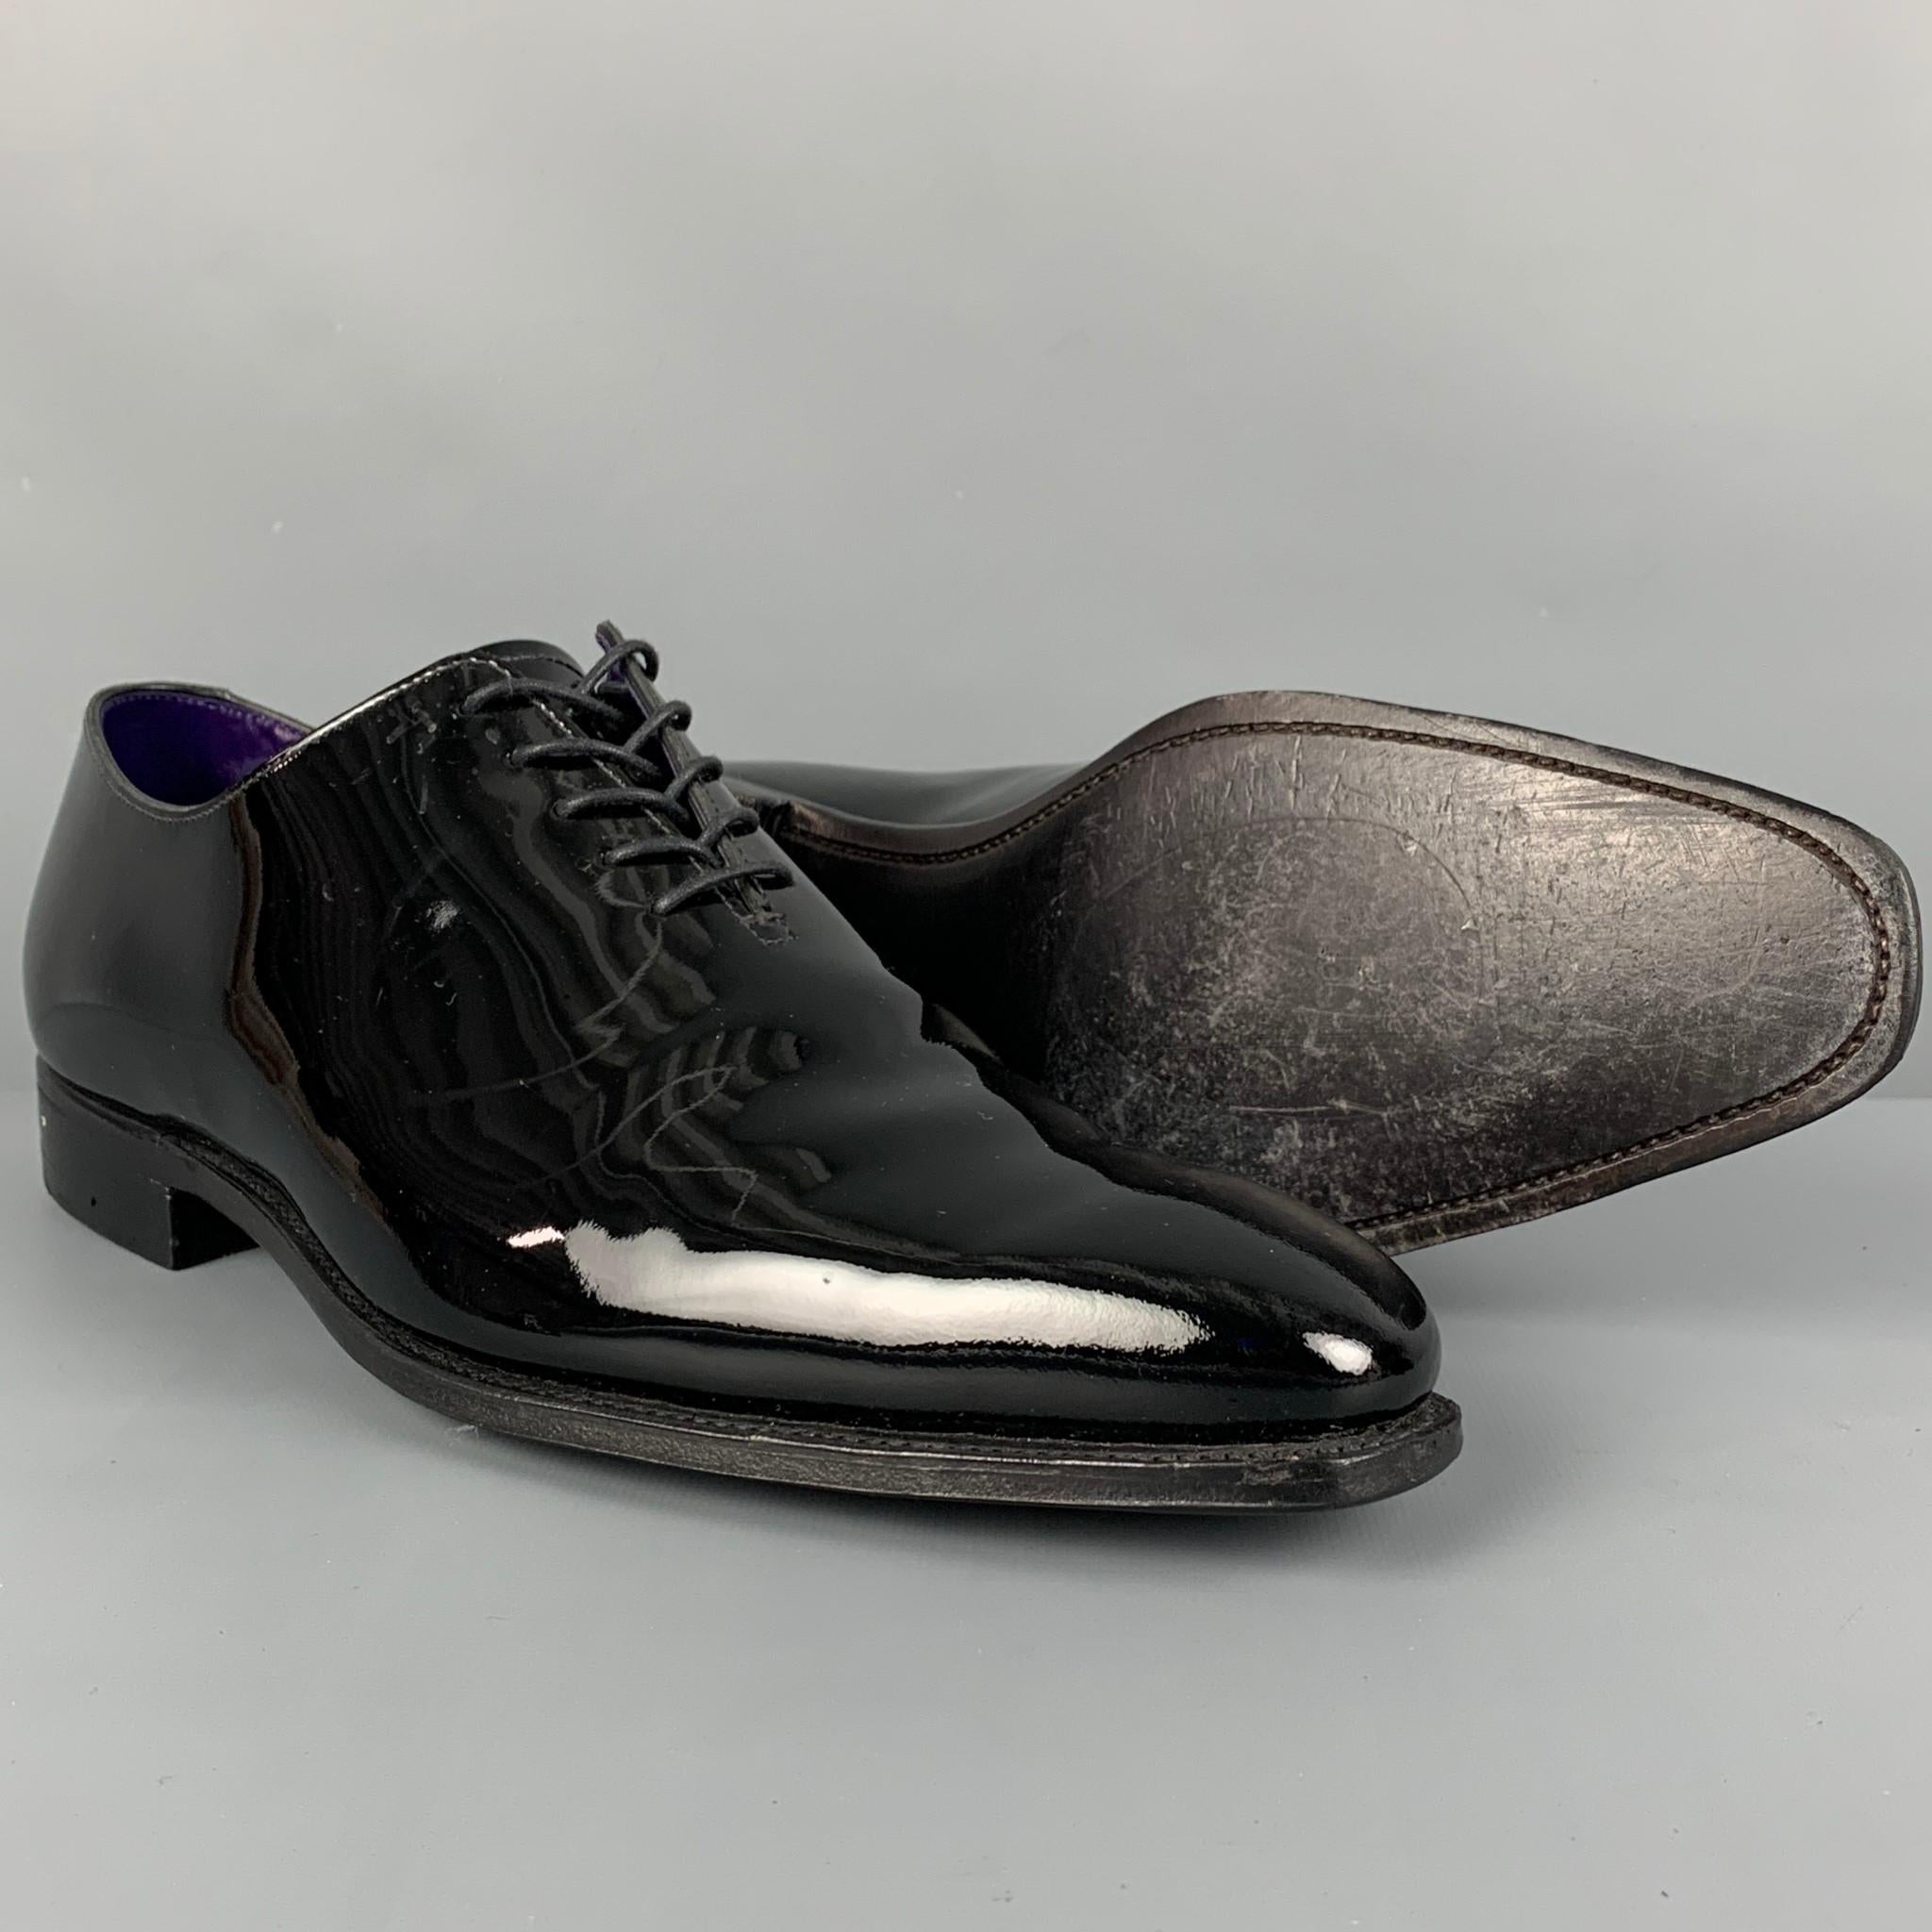 CROCKETT & JONES for BARNEY'S NEW YORK loafers comes in a black patent leather featuring a square toe and a lace up closure. Made in England. 

Very Good Pre-Owned Condition.
Marked: 9 D

Outsole: 12.25 in. x 4 in. 